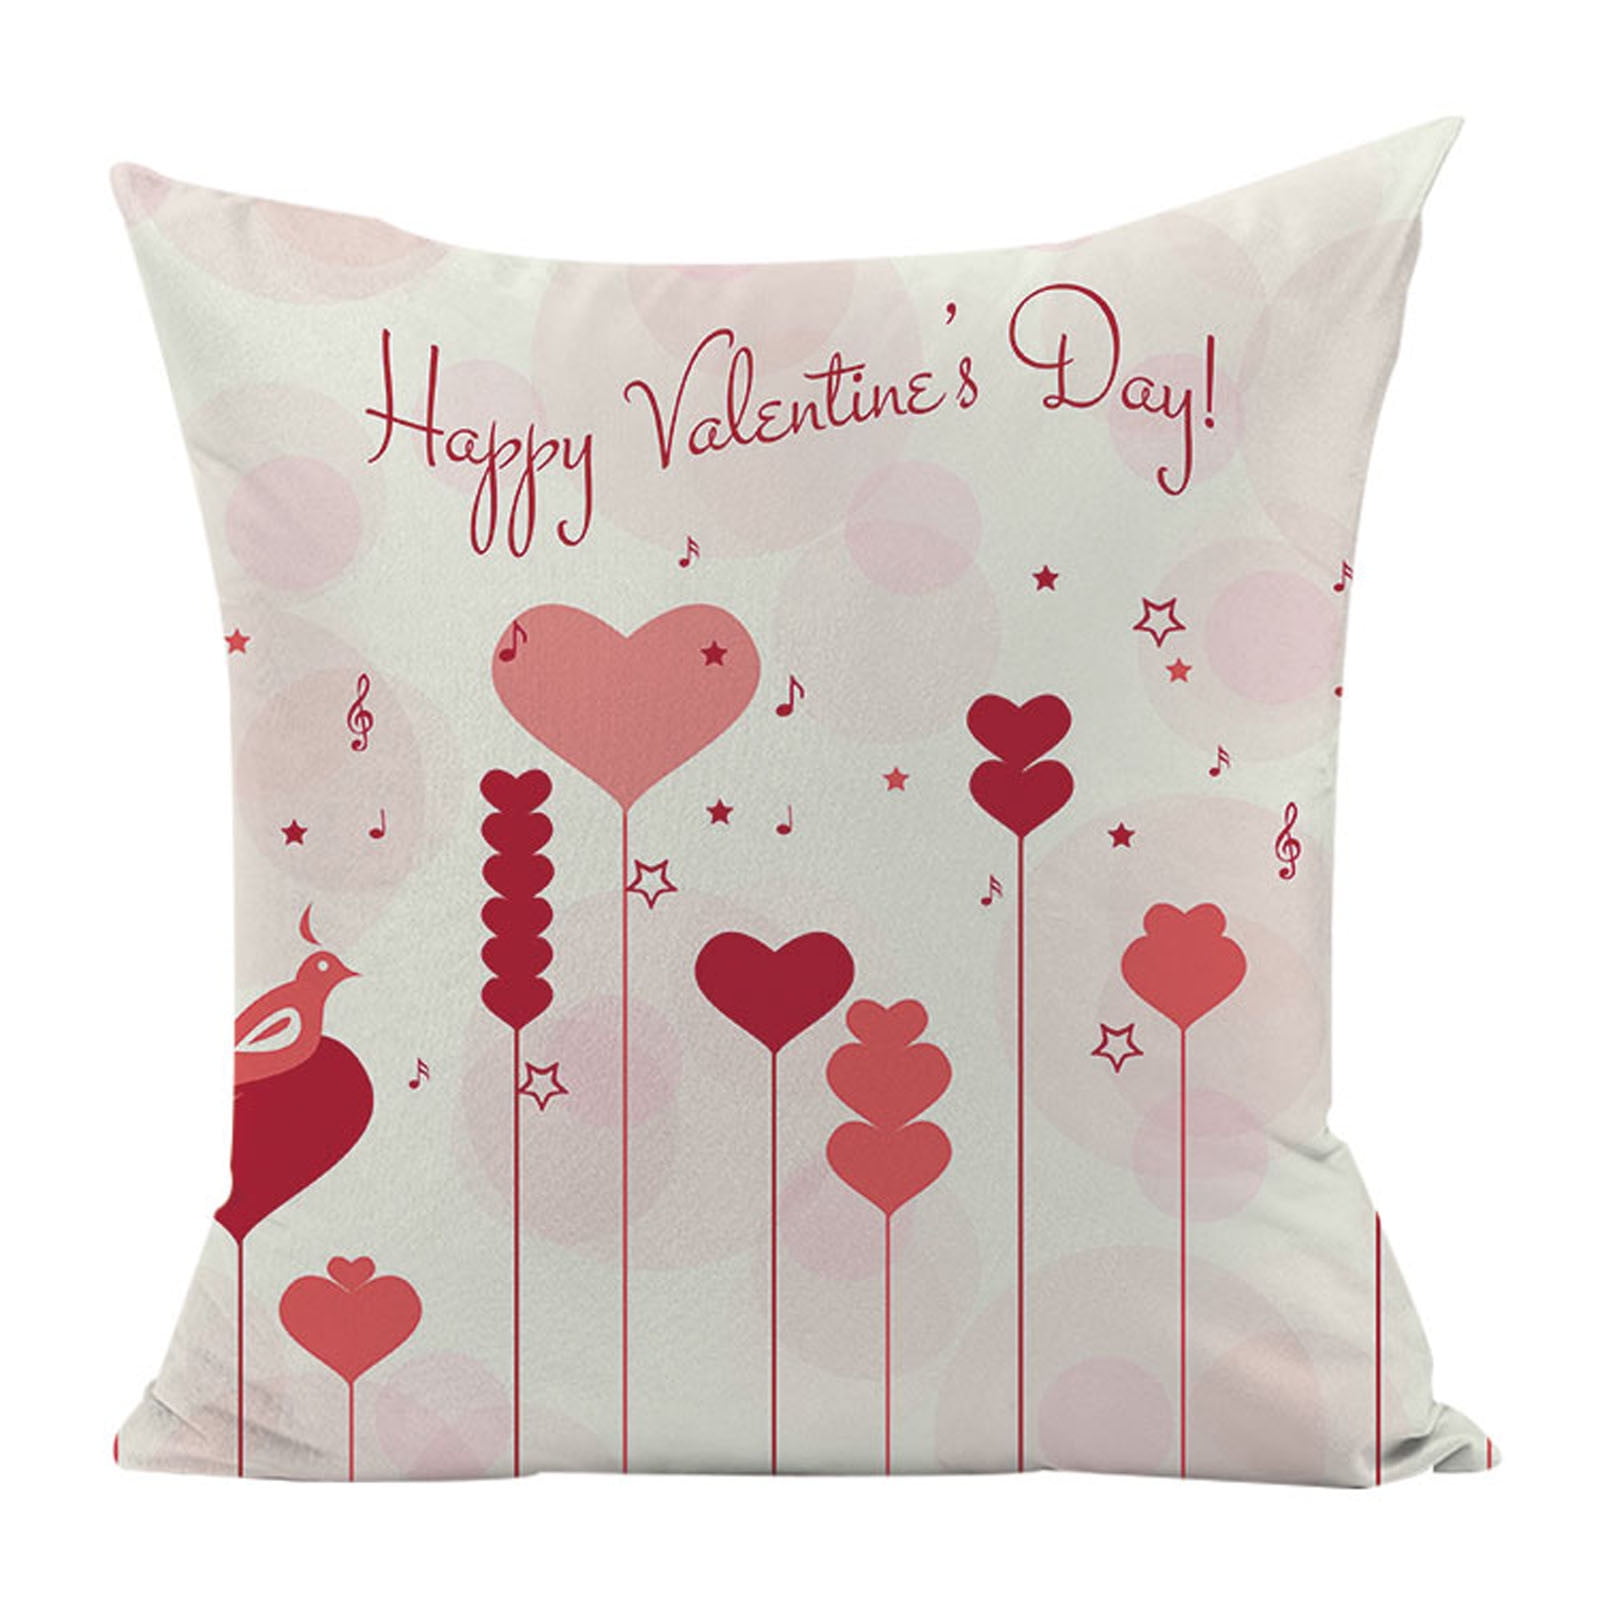 Red Truck Watercolor Hearts Pillow Holiday Decor Hearts Pillow Valentine's Day Pillow Spring Decor Flowers Hearts Valentine's Day Decor